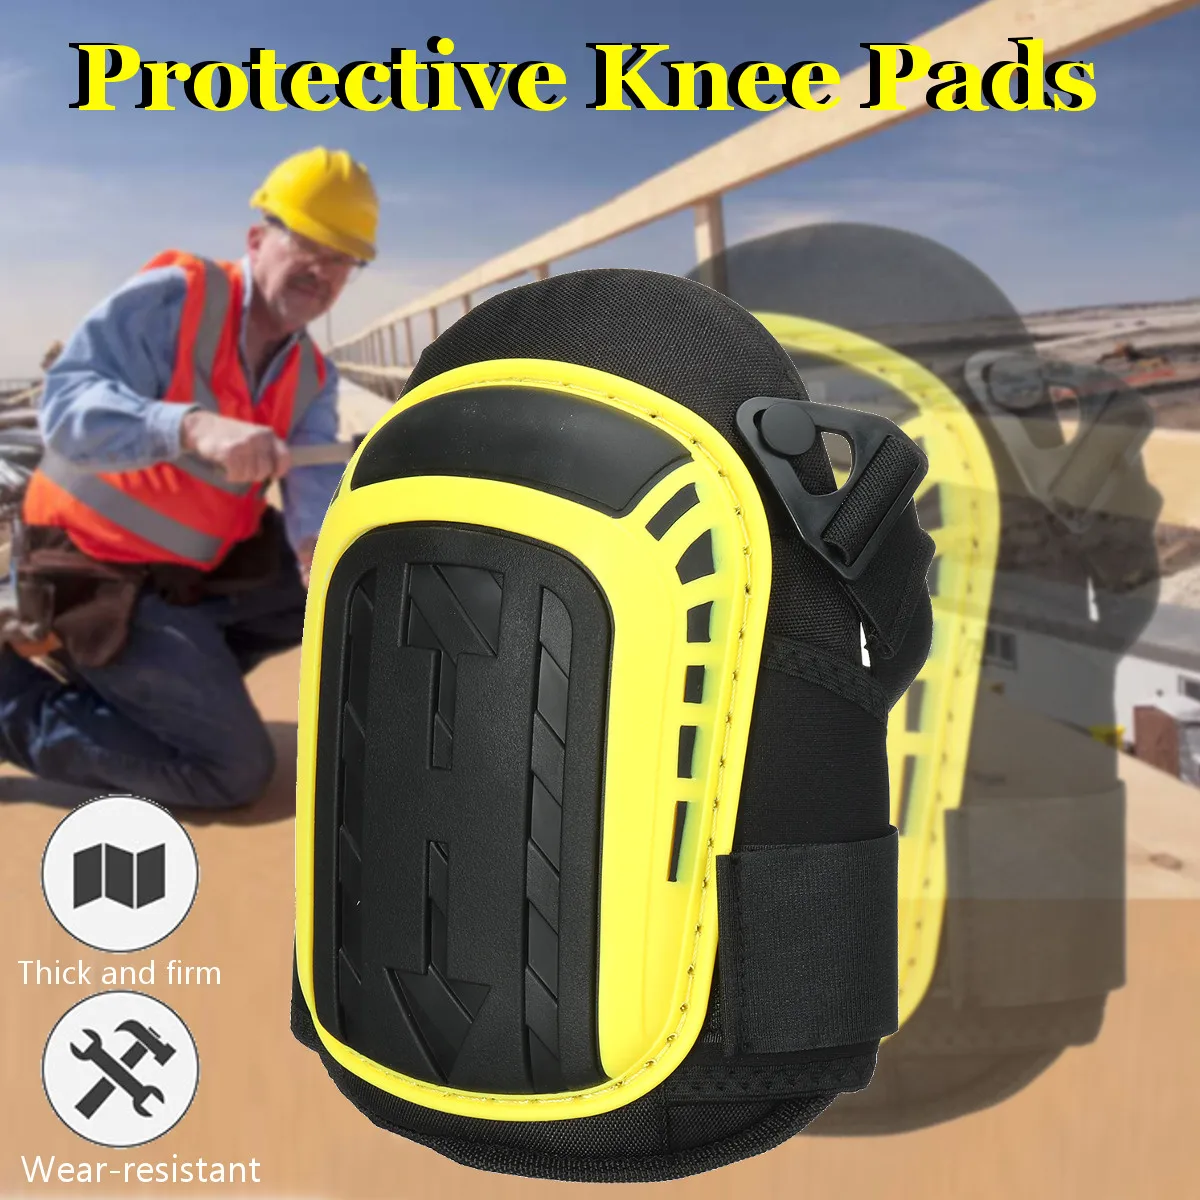 

Gel Knee Pads For Work Gardening-Heavy Duty Professional Knee Pad with EVA Foam GEL Cushion For Construction Concrete